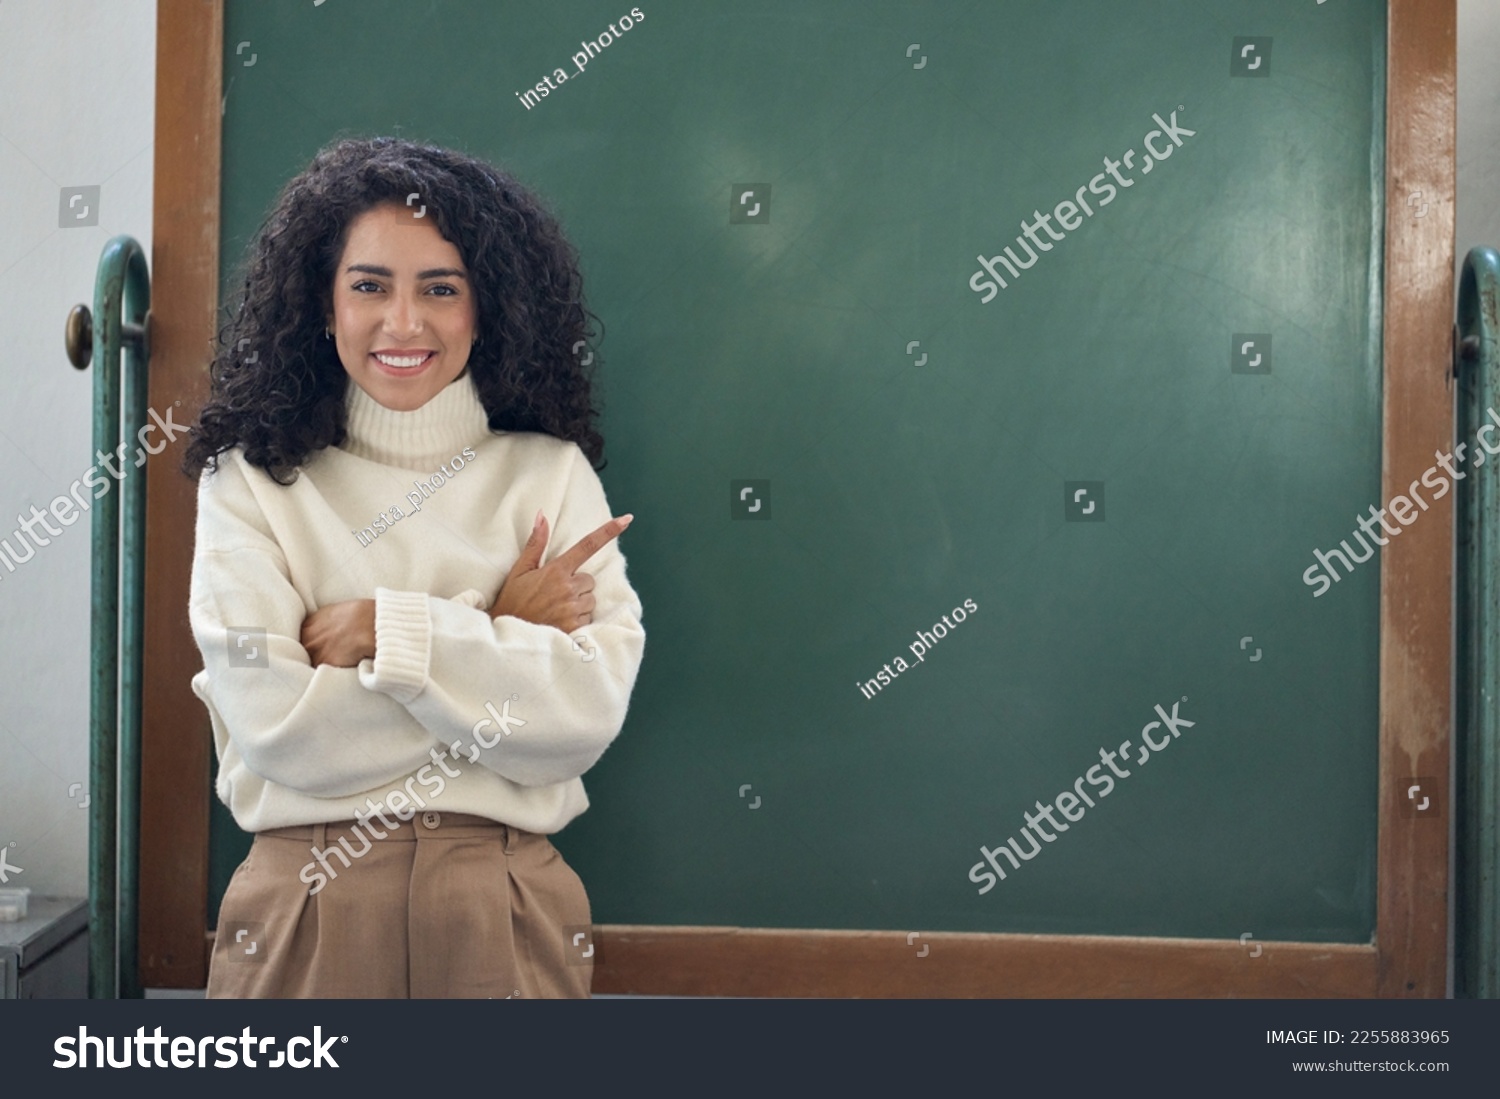 Young happy woman school professional teacher, female coach leader pointing at empty blank mock up chalkboard in classroom presenting showing business training course virtual education classes ads. #2255883965